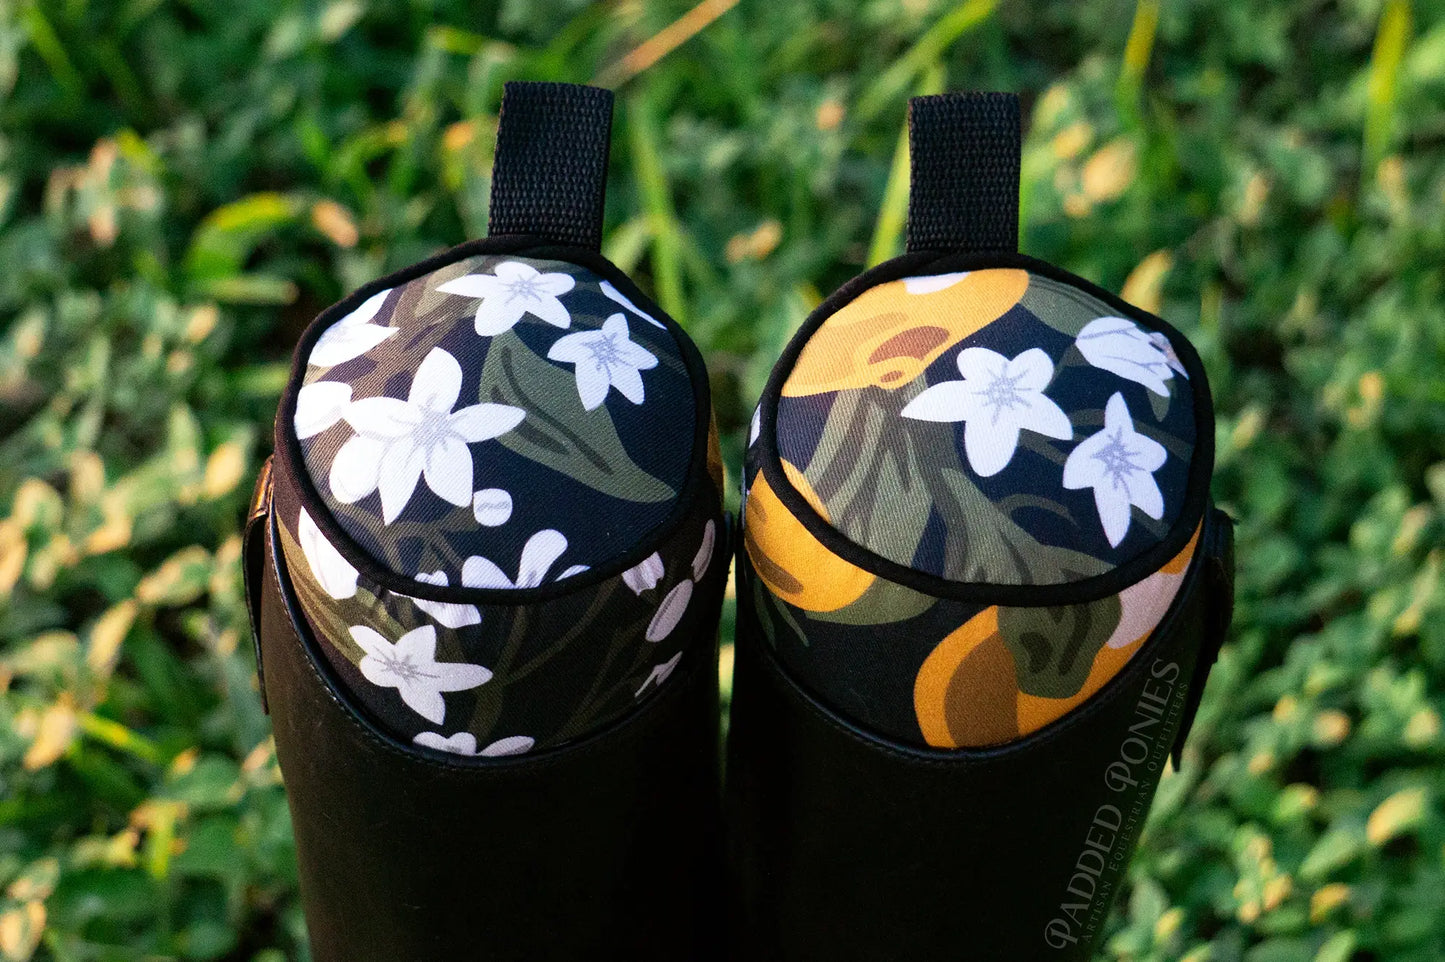 Black Lemons and Bees Floral Boot Tree Stuffers